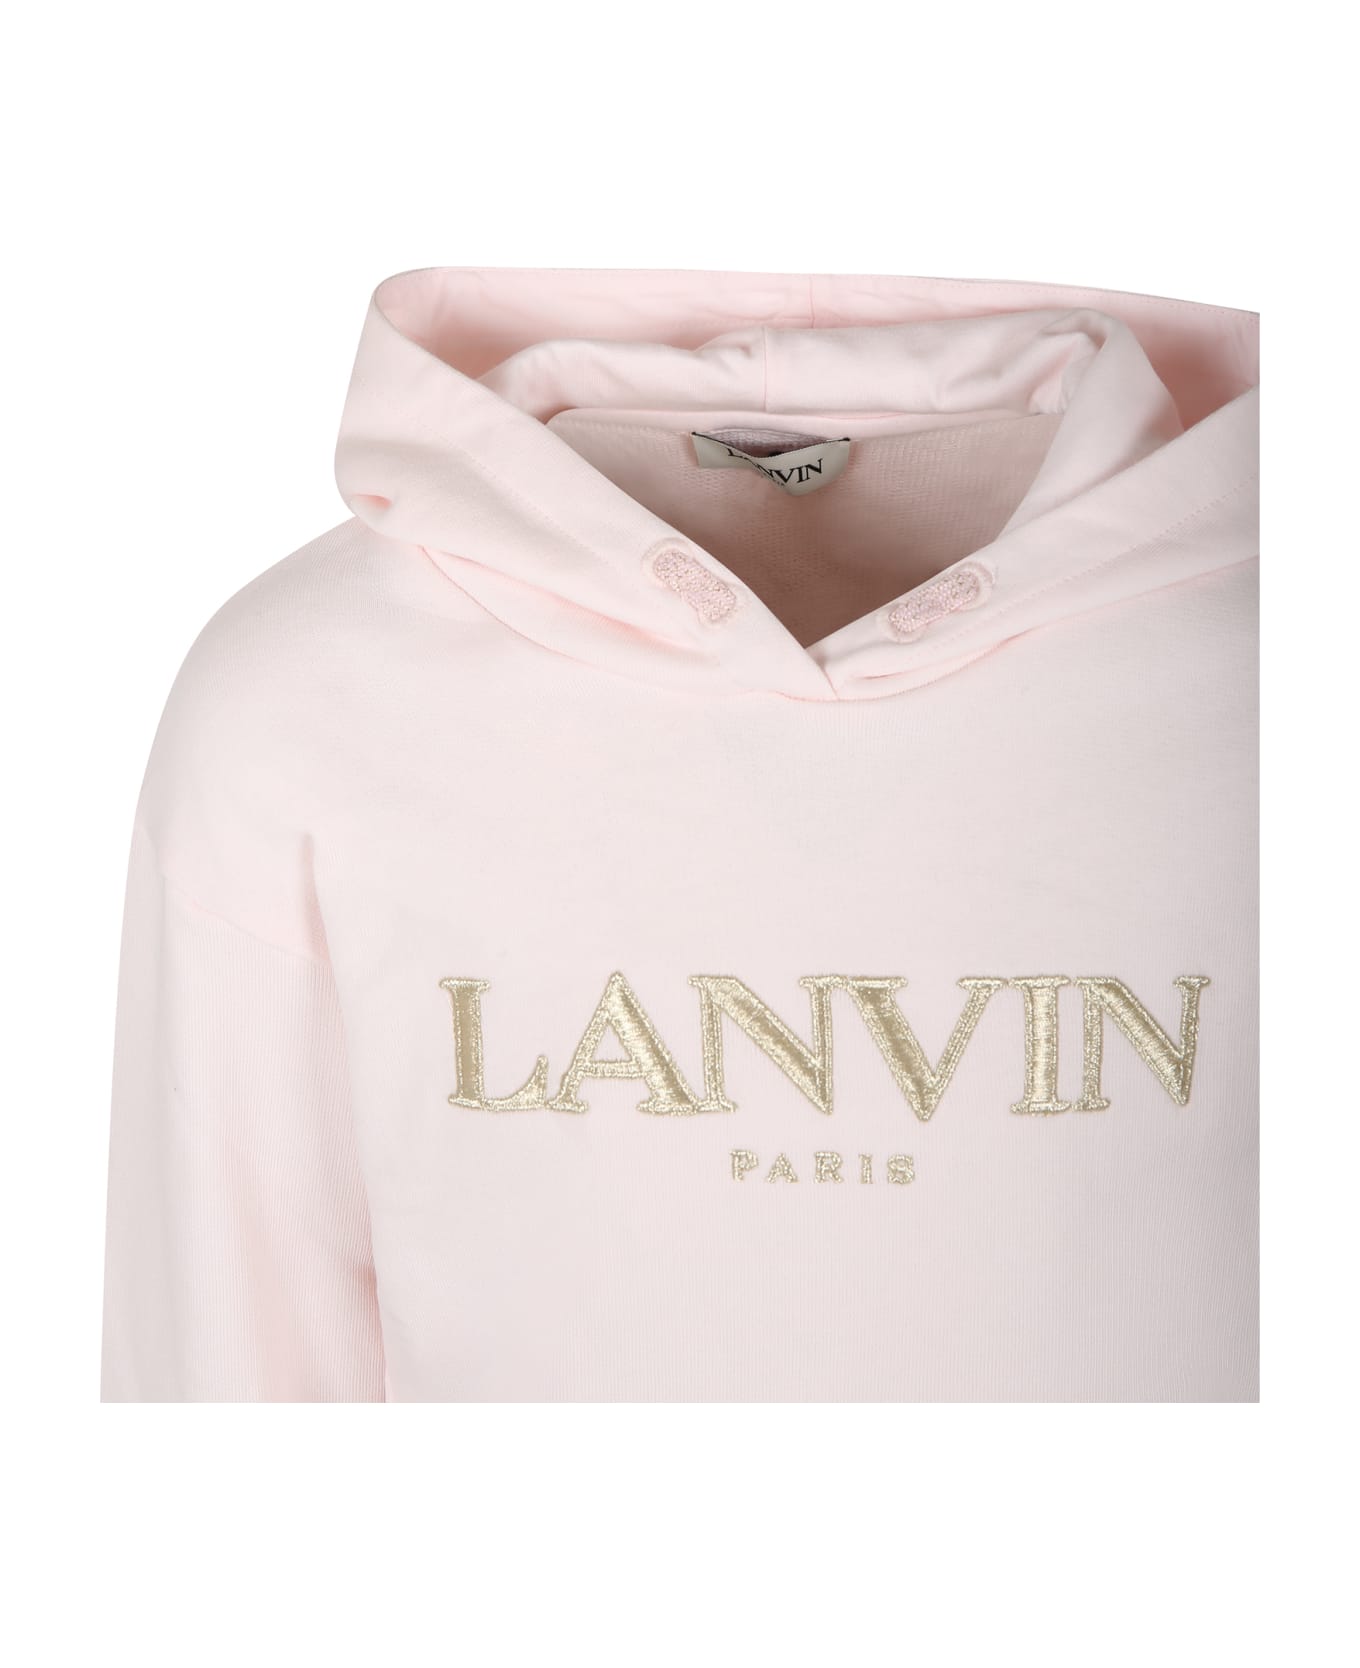 Lanvin Pink Sweatshirt With Hood For Girl With Logo - Pink